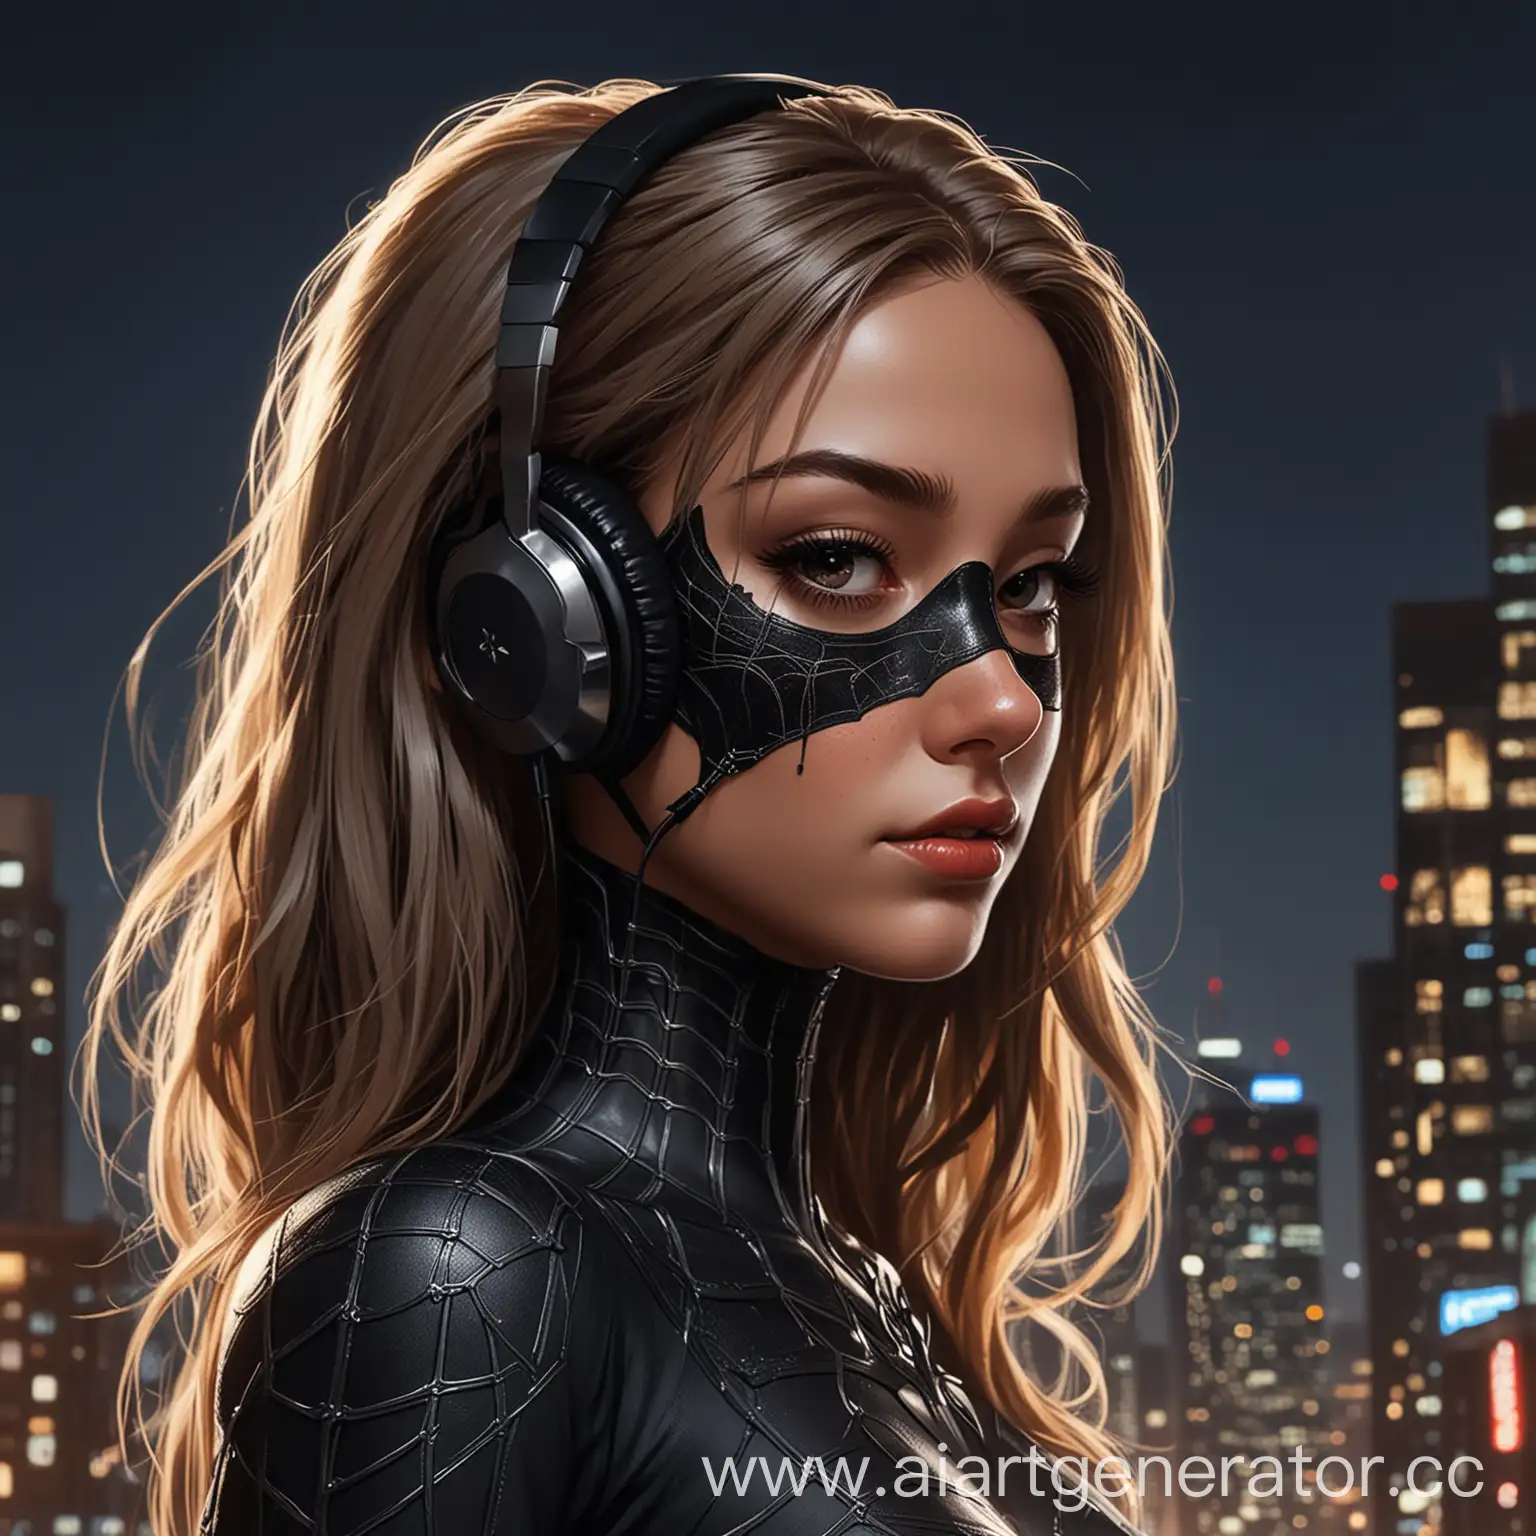 Marvel-Style-Girl-and-Human-Spider-Night-City-View